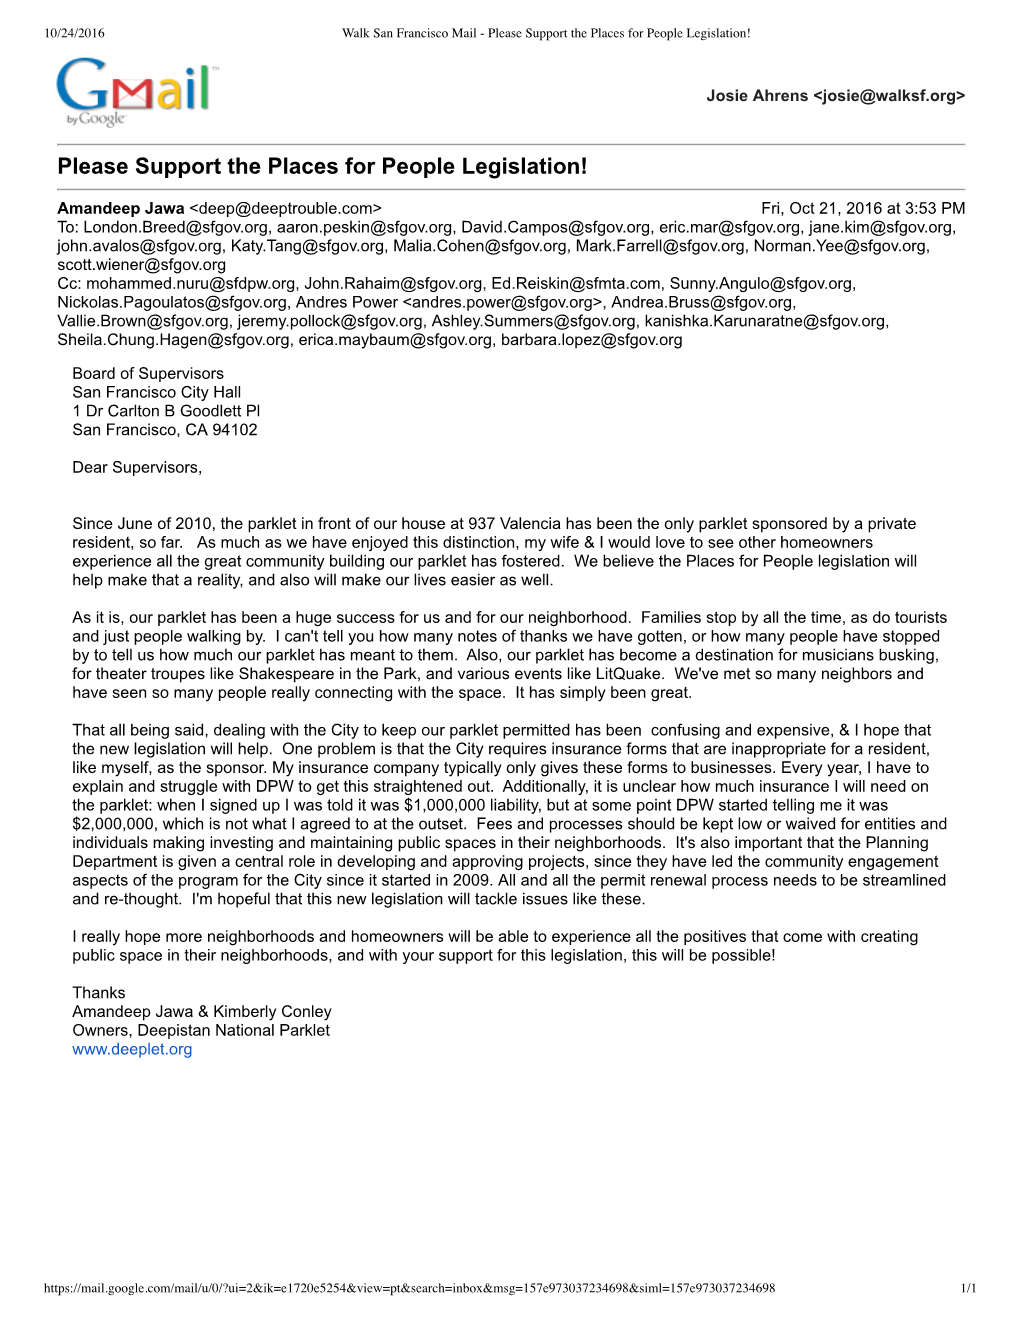 Please Support the Places for People Legislation!